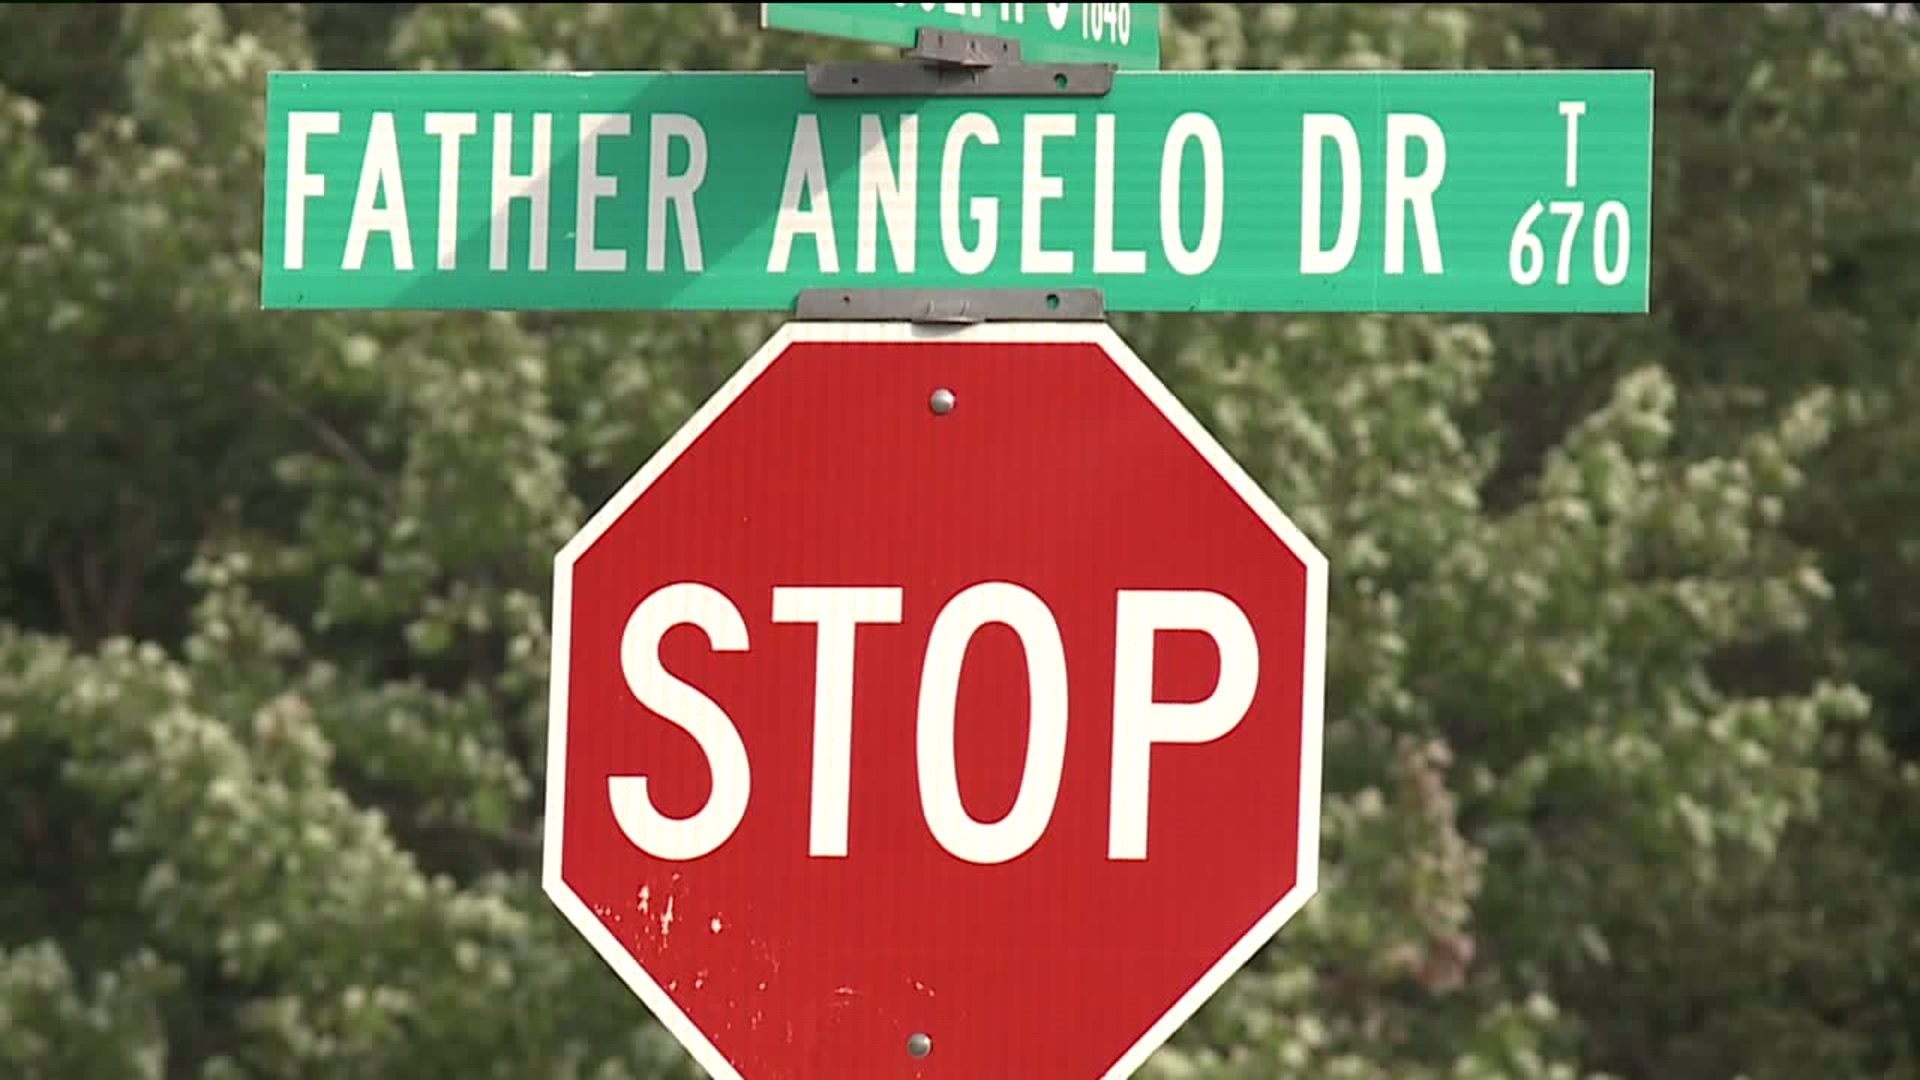 Neighbors Want Street Named After Priest Accused of Child Sex Assault Changed